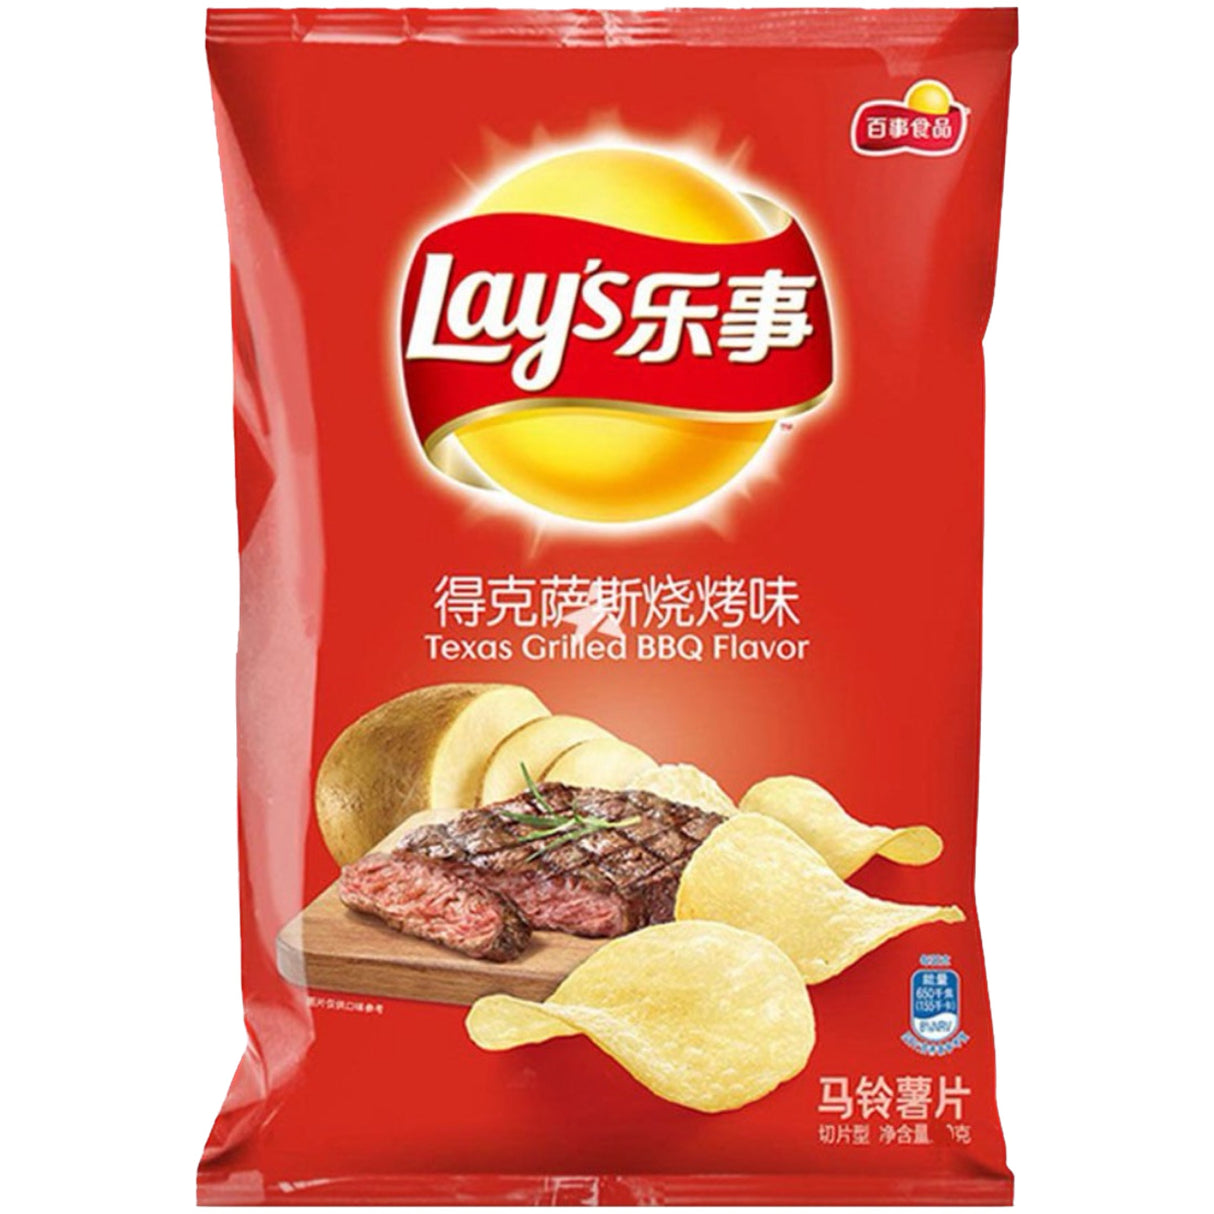 Lay’s Texas Grilled BBQ -China